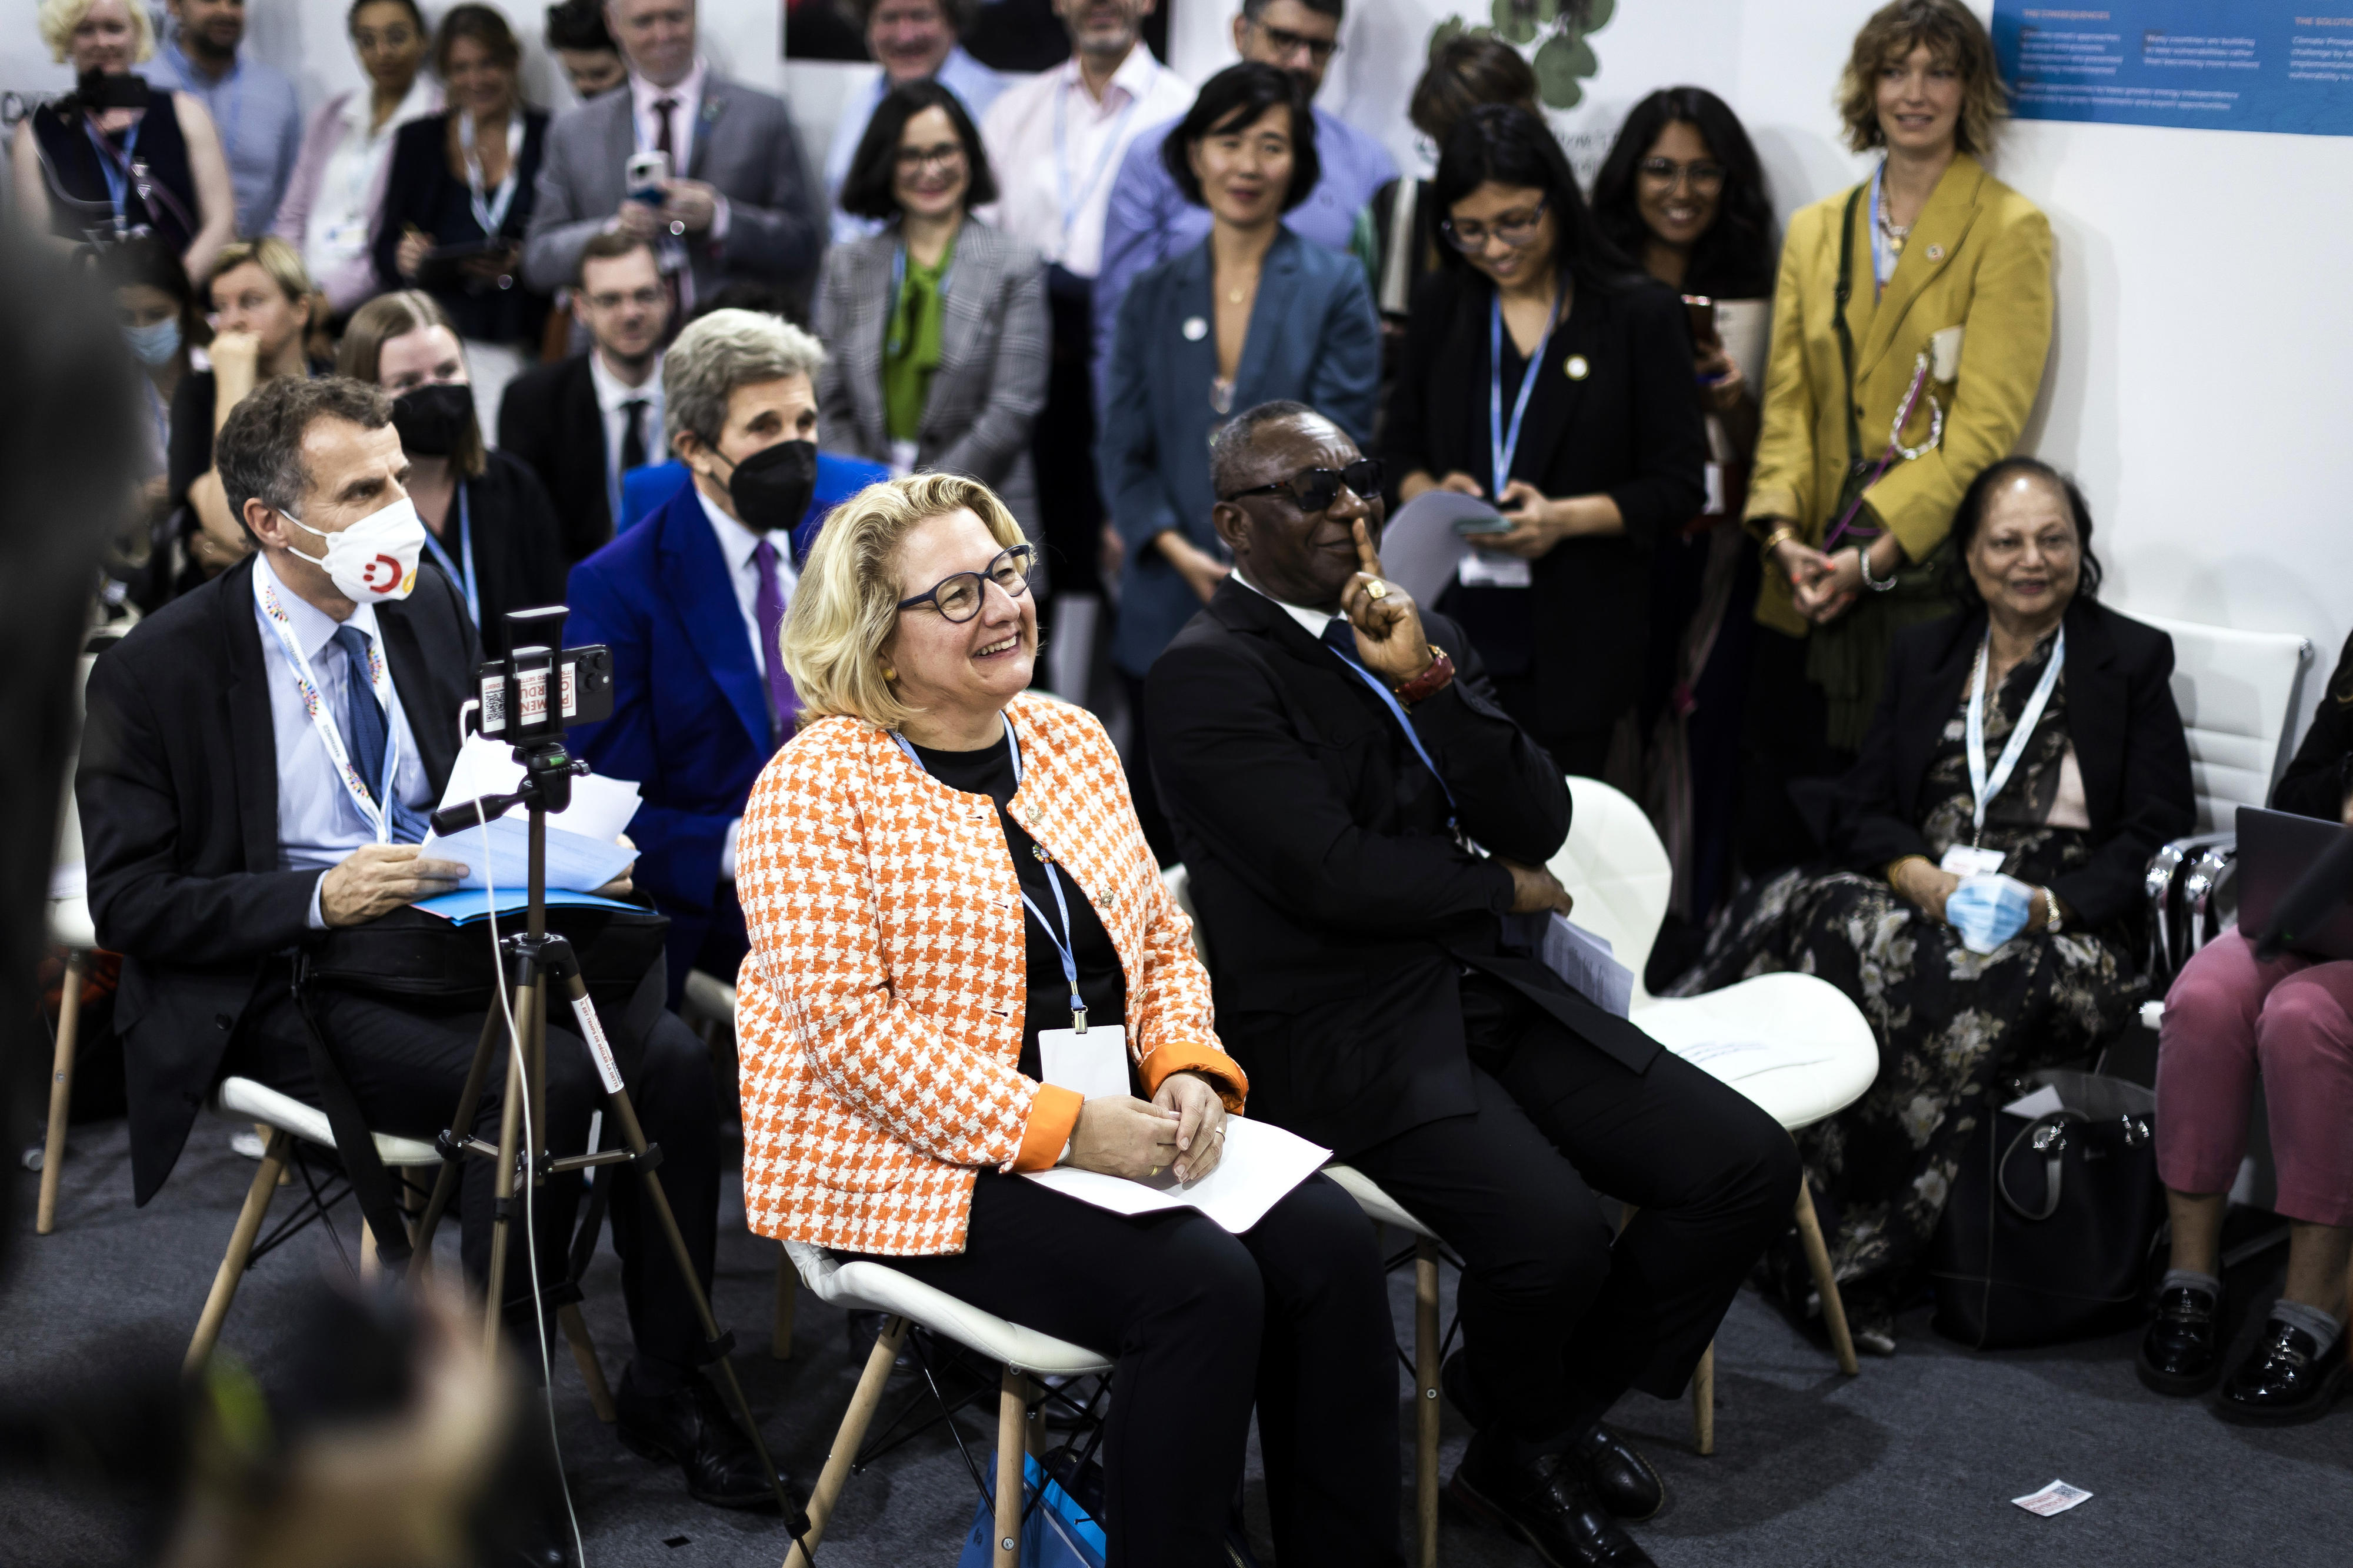 Development Minister Svenja Schulze, Henry Kokofu, Special Envoy of the Climate Vulnerable Forum (CVF) Ghana Presidency, Special Presidential Envoy for Climate John Kerry and others participating in the launch event for the Global Shield against Climate Risks